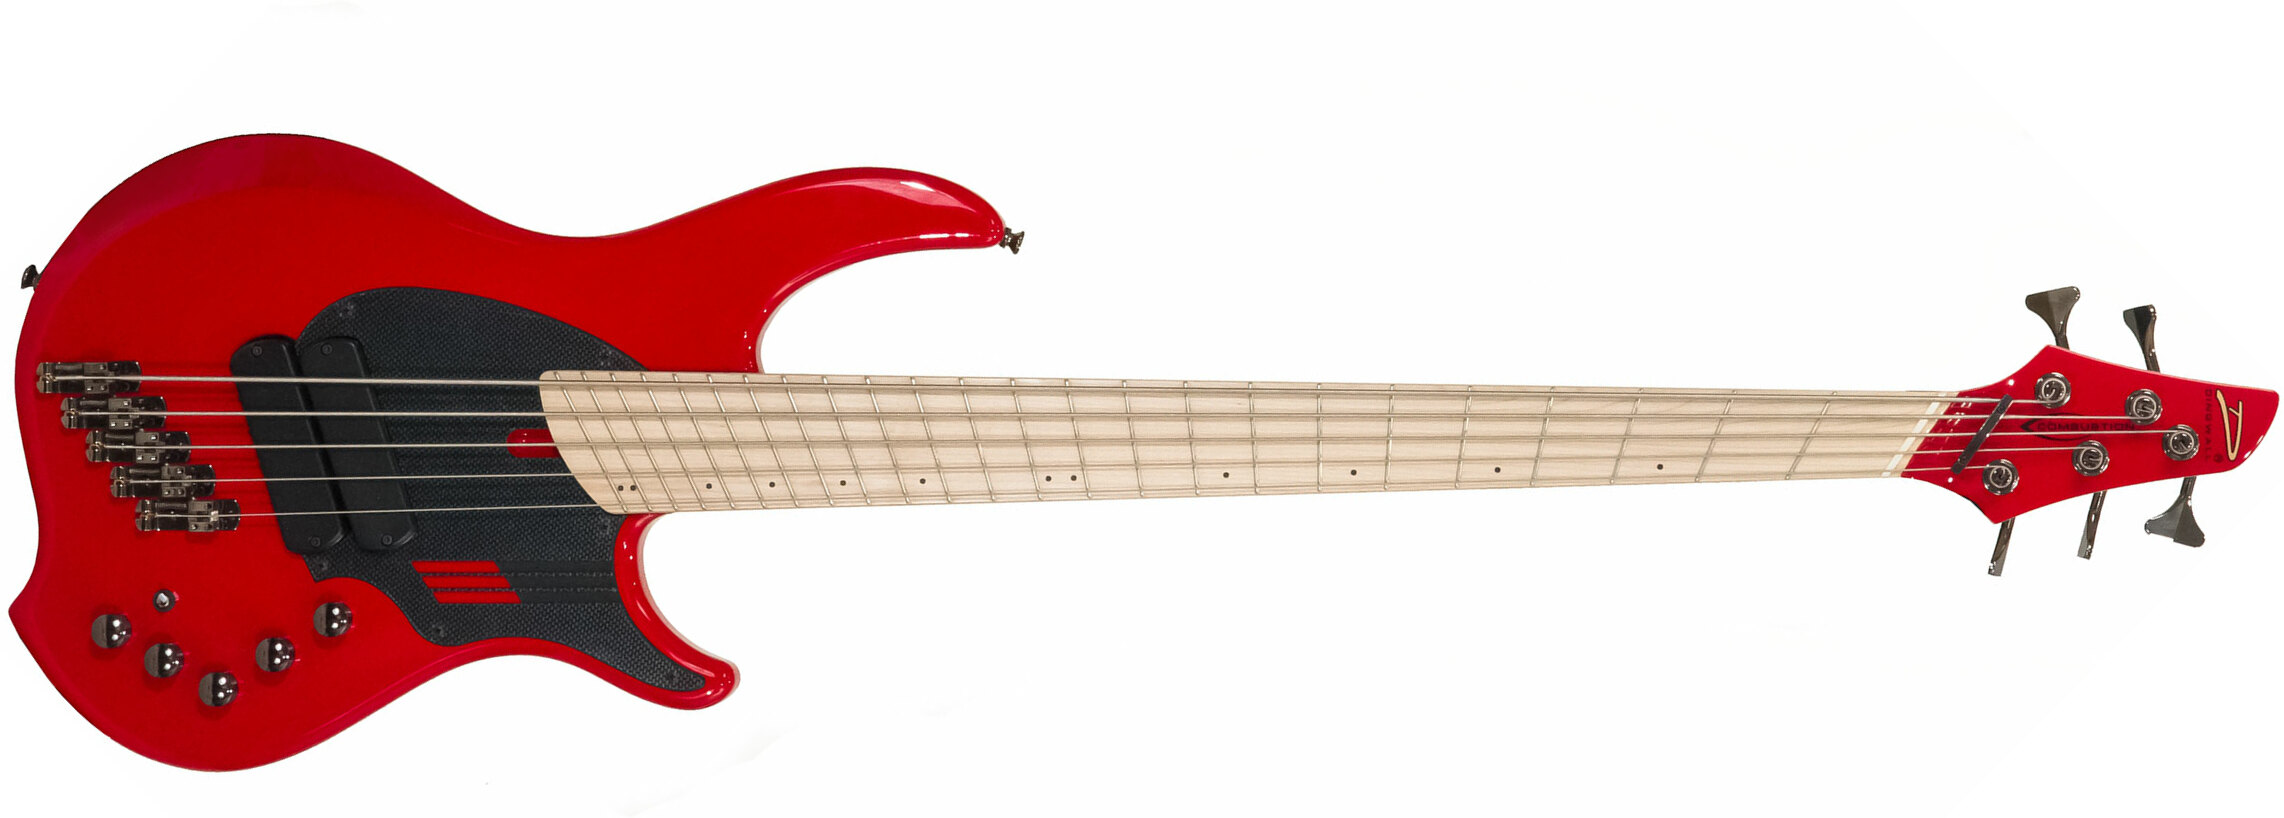 Dingwall Adam Nolly Getgood Ng2 5c Signature 2pu Active Mn - Ferrari Red - Solid body electric bass - Main picture